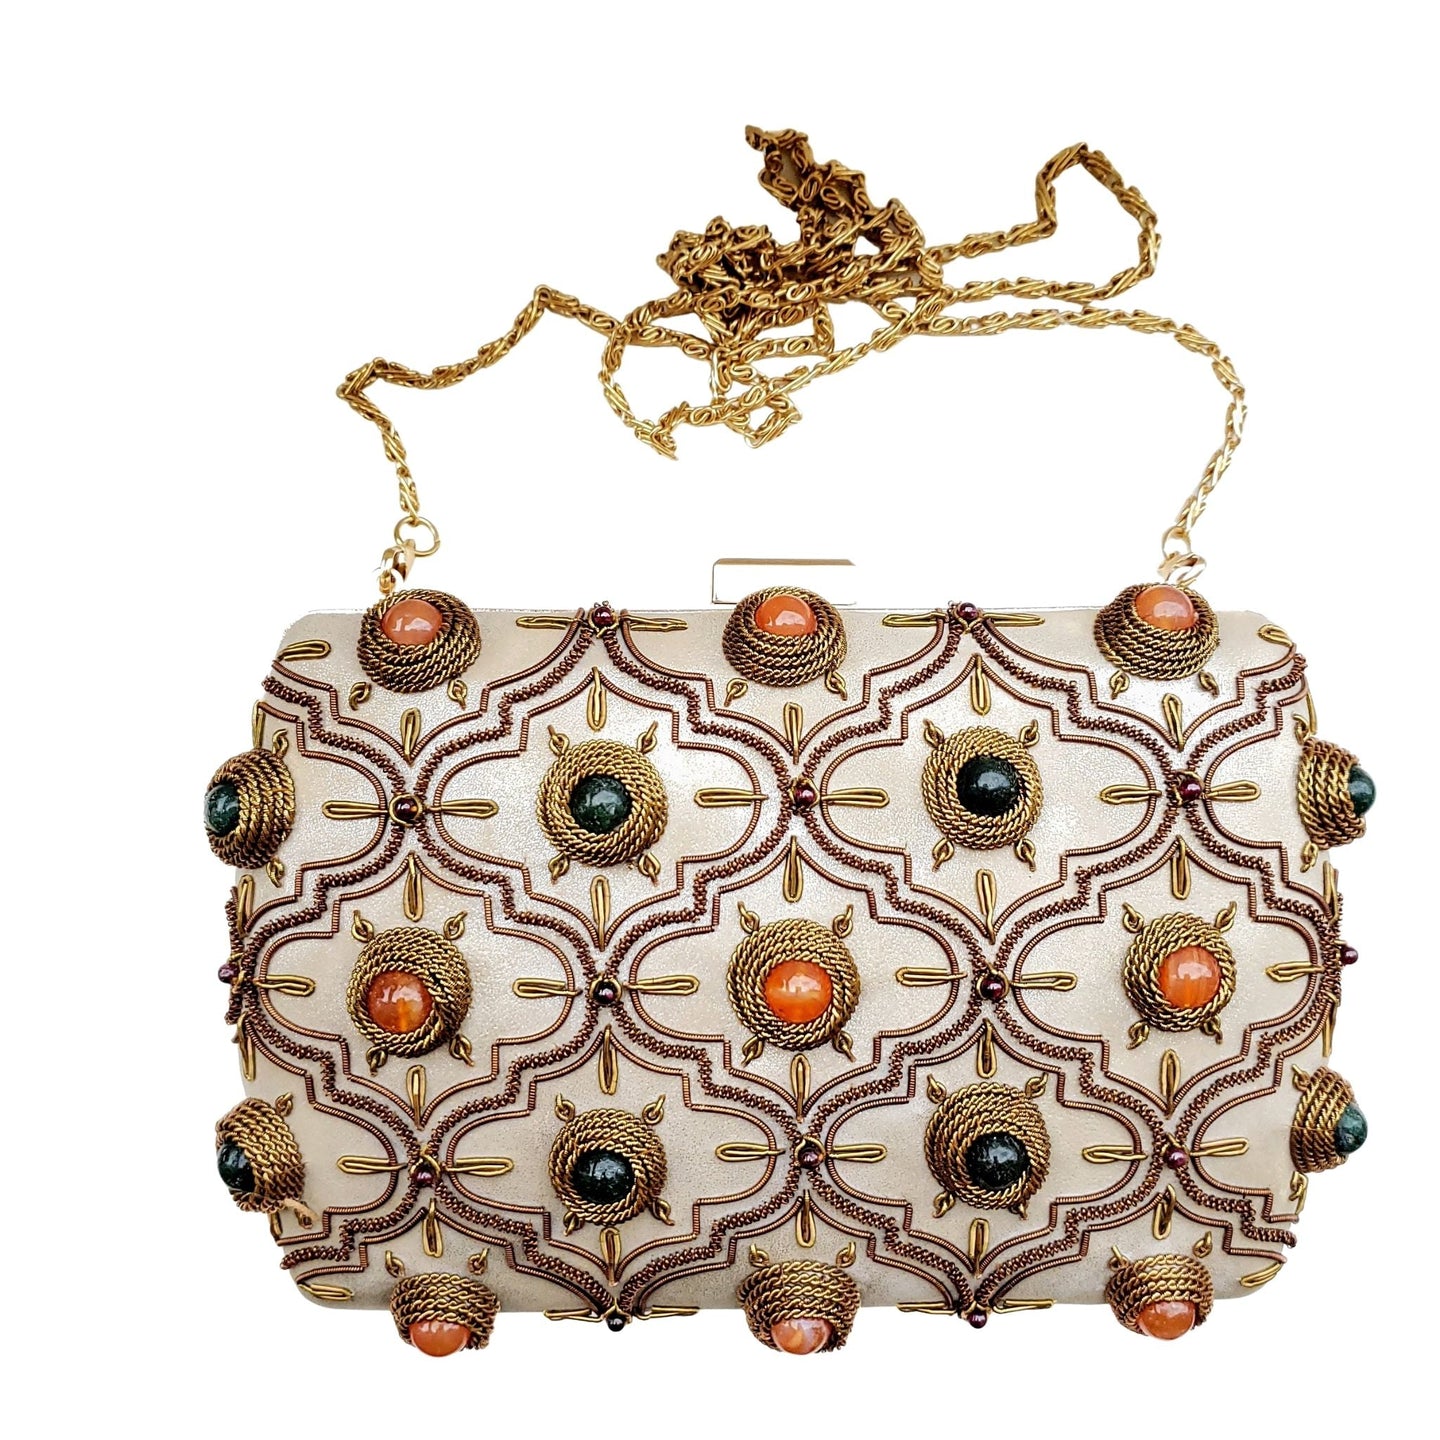 Moroccan style embroidered hard case box clutch embellished with jade and carnelian gemstones. 